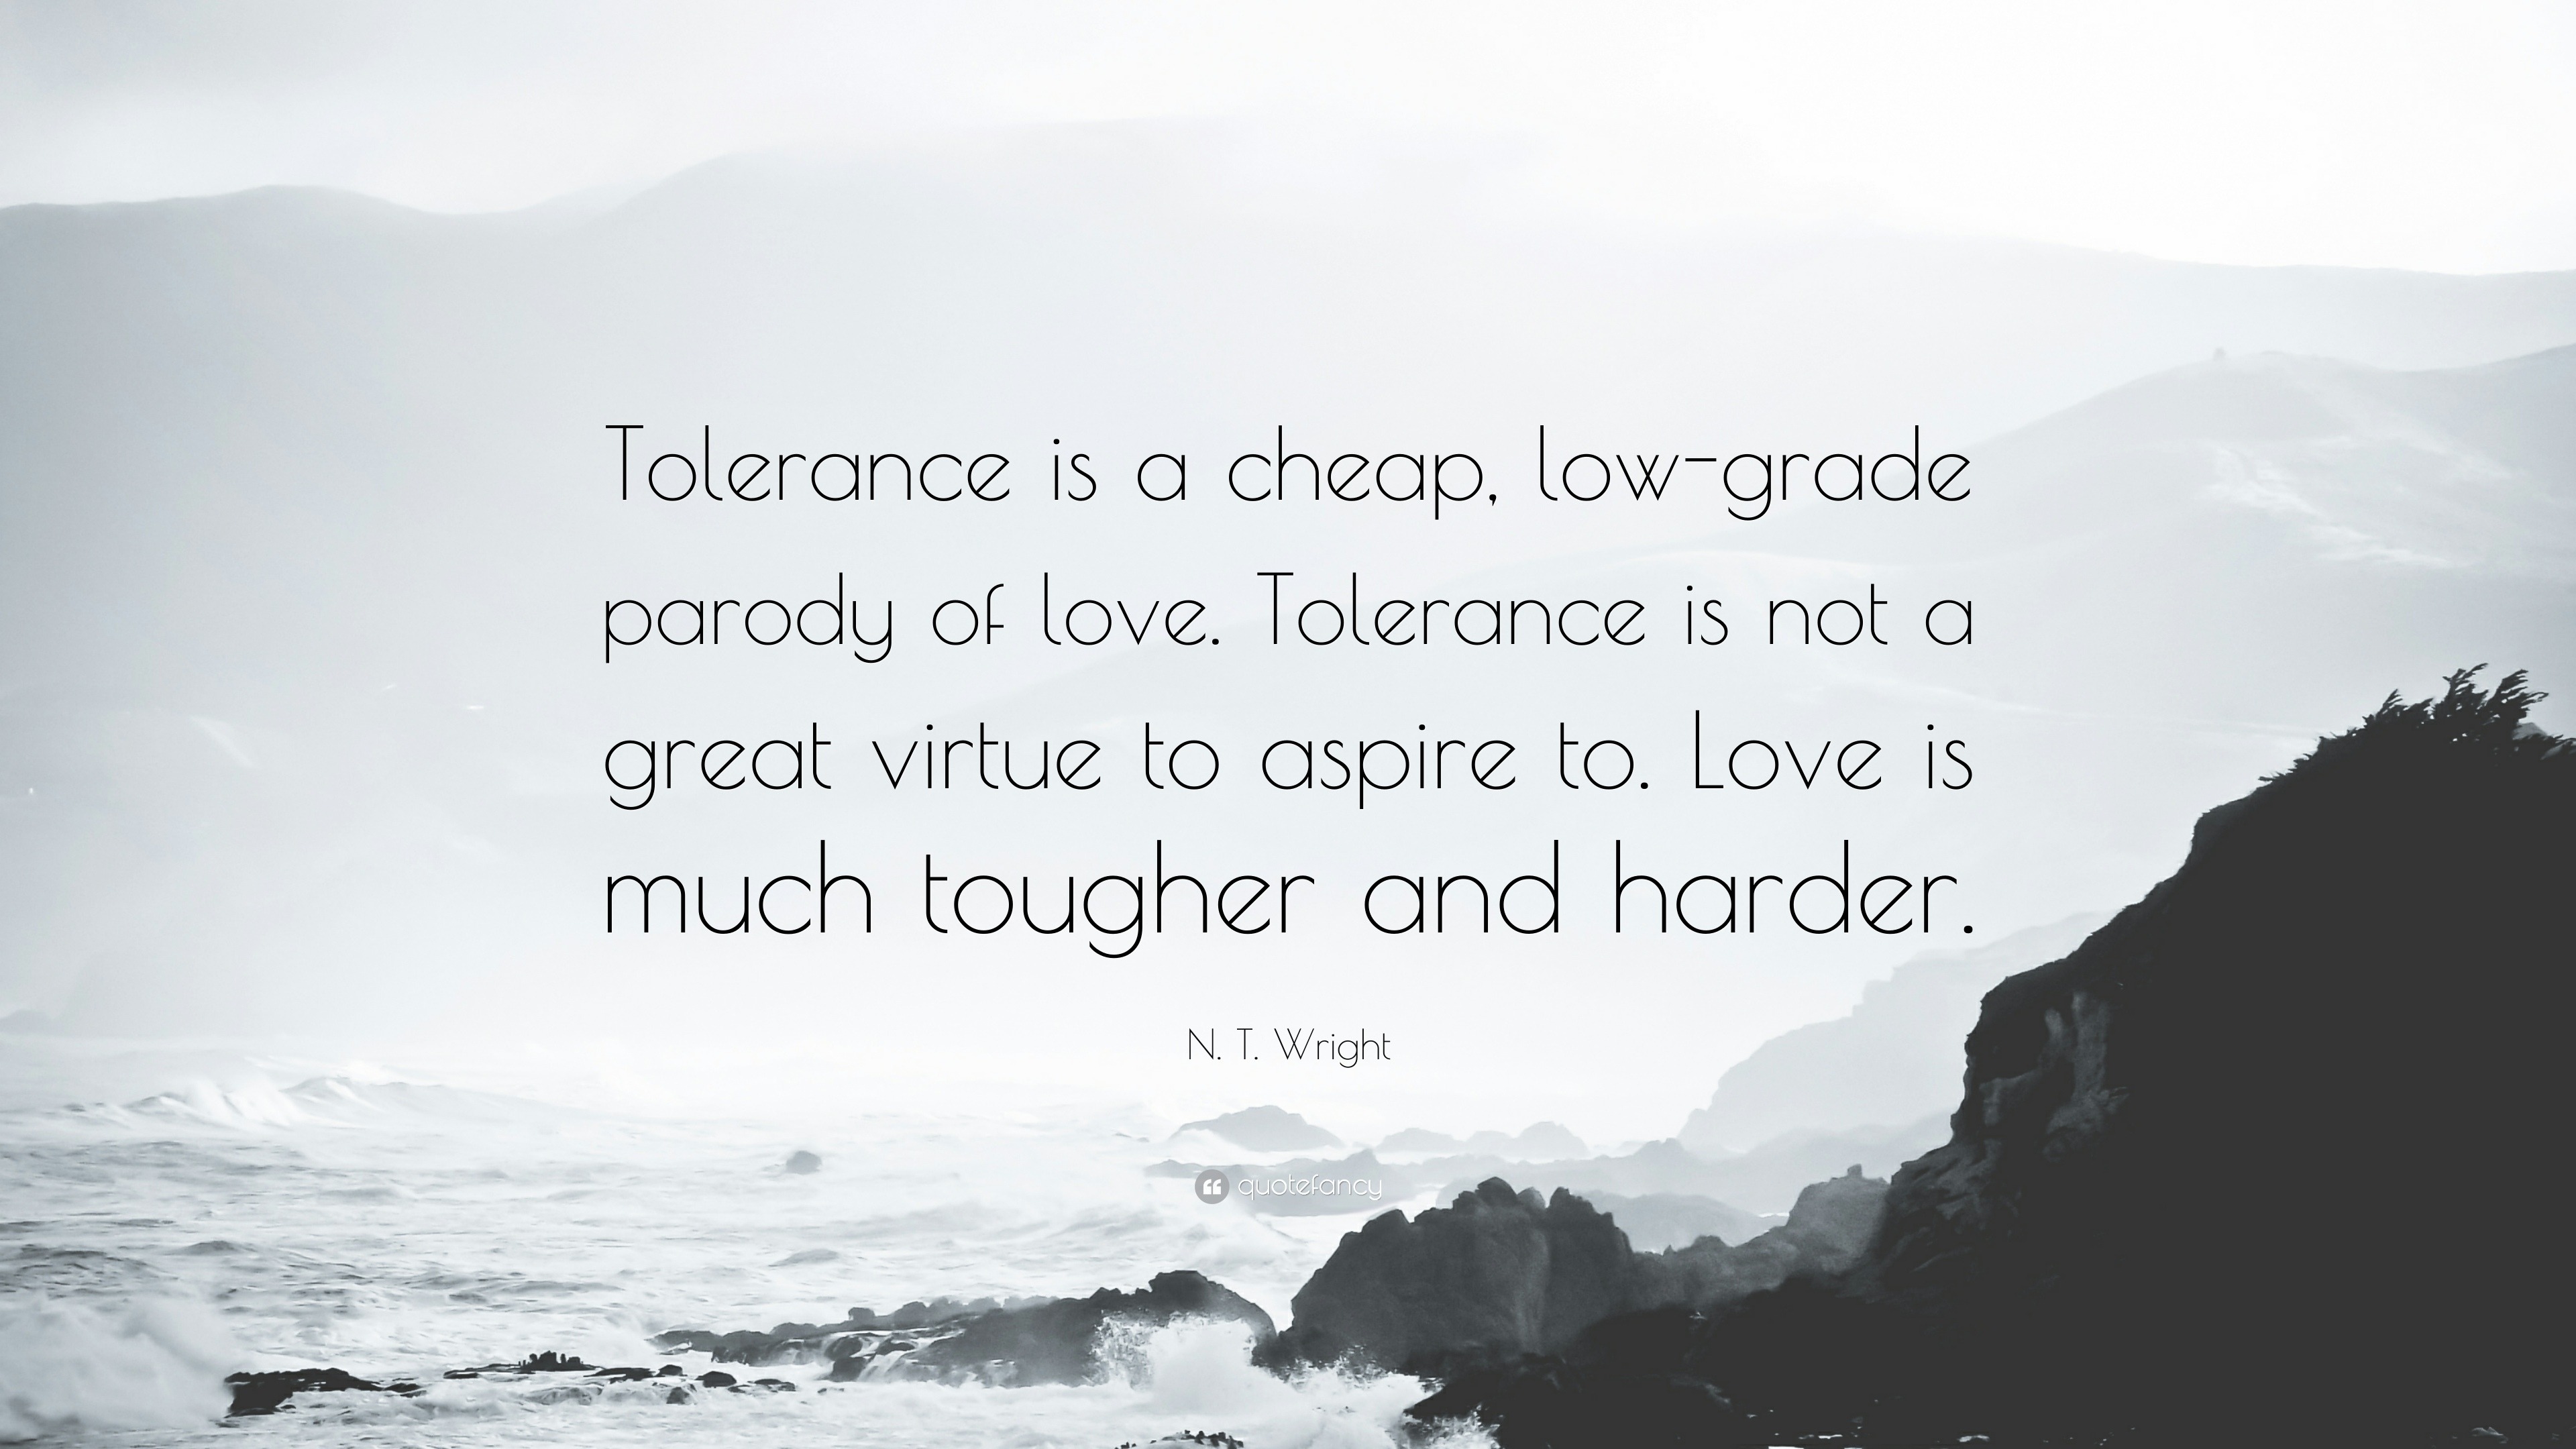 N T Wright Quote “Tolerance is a cheap low grade parody of love